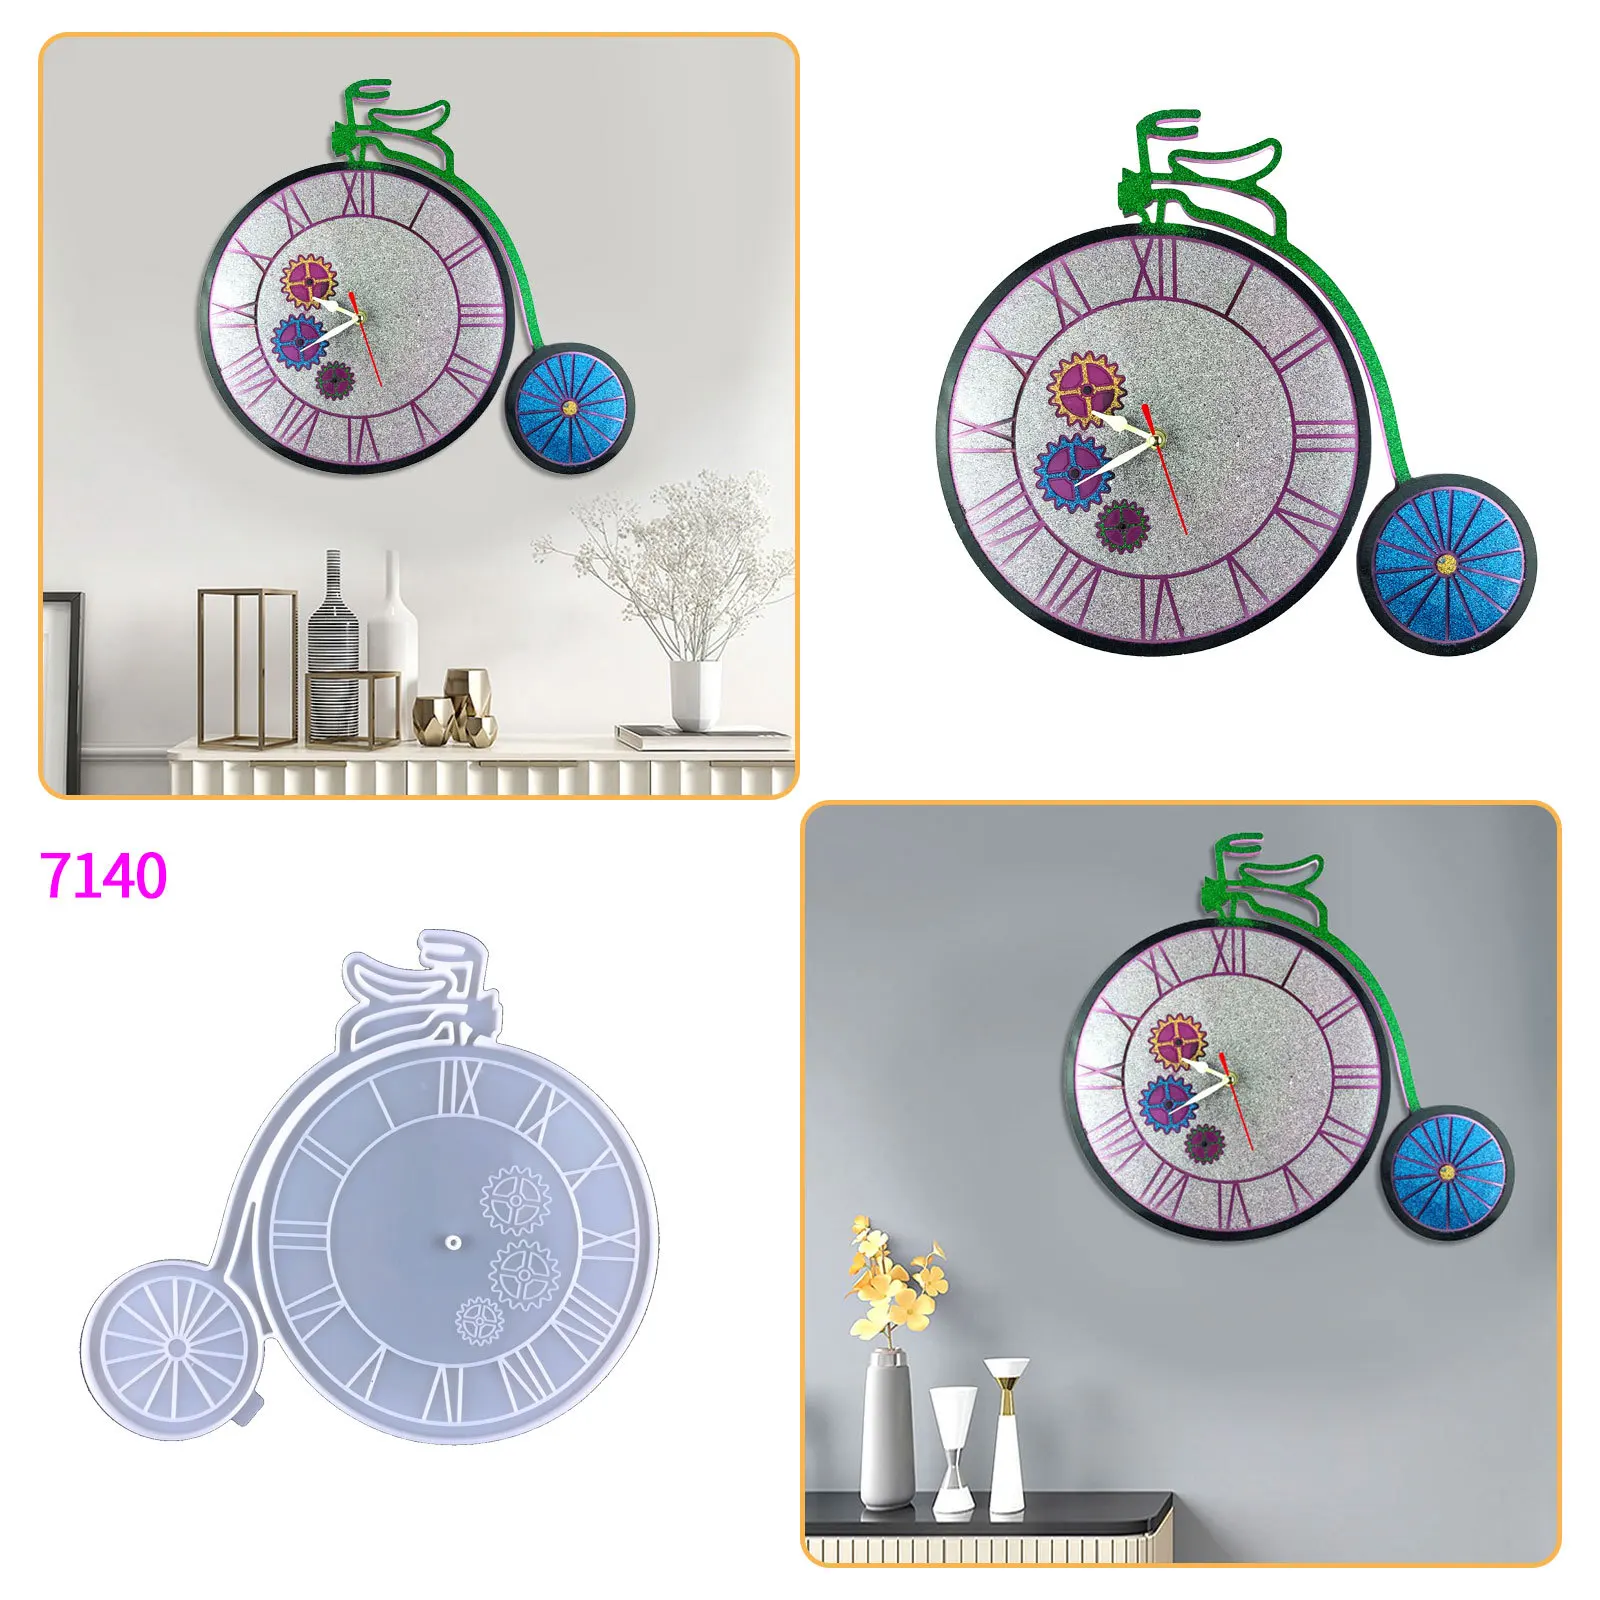 Bicycle Clock Silicone Mold DIY Round Gear Creative Wall Clock Hanging Decoration Mirror Silicone Epoxy Mould For Resin clock silicone mold diy round clock mold wall hanging decorative mirror resin epoxy mold with handmade tool